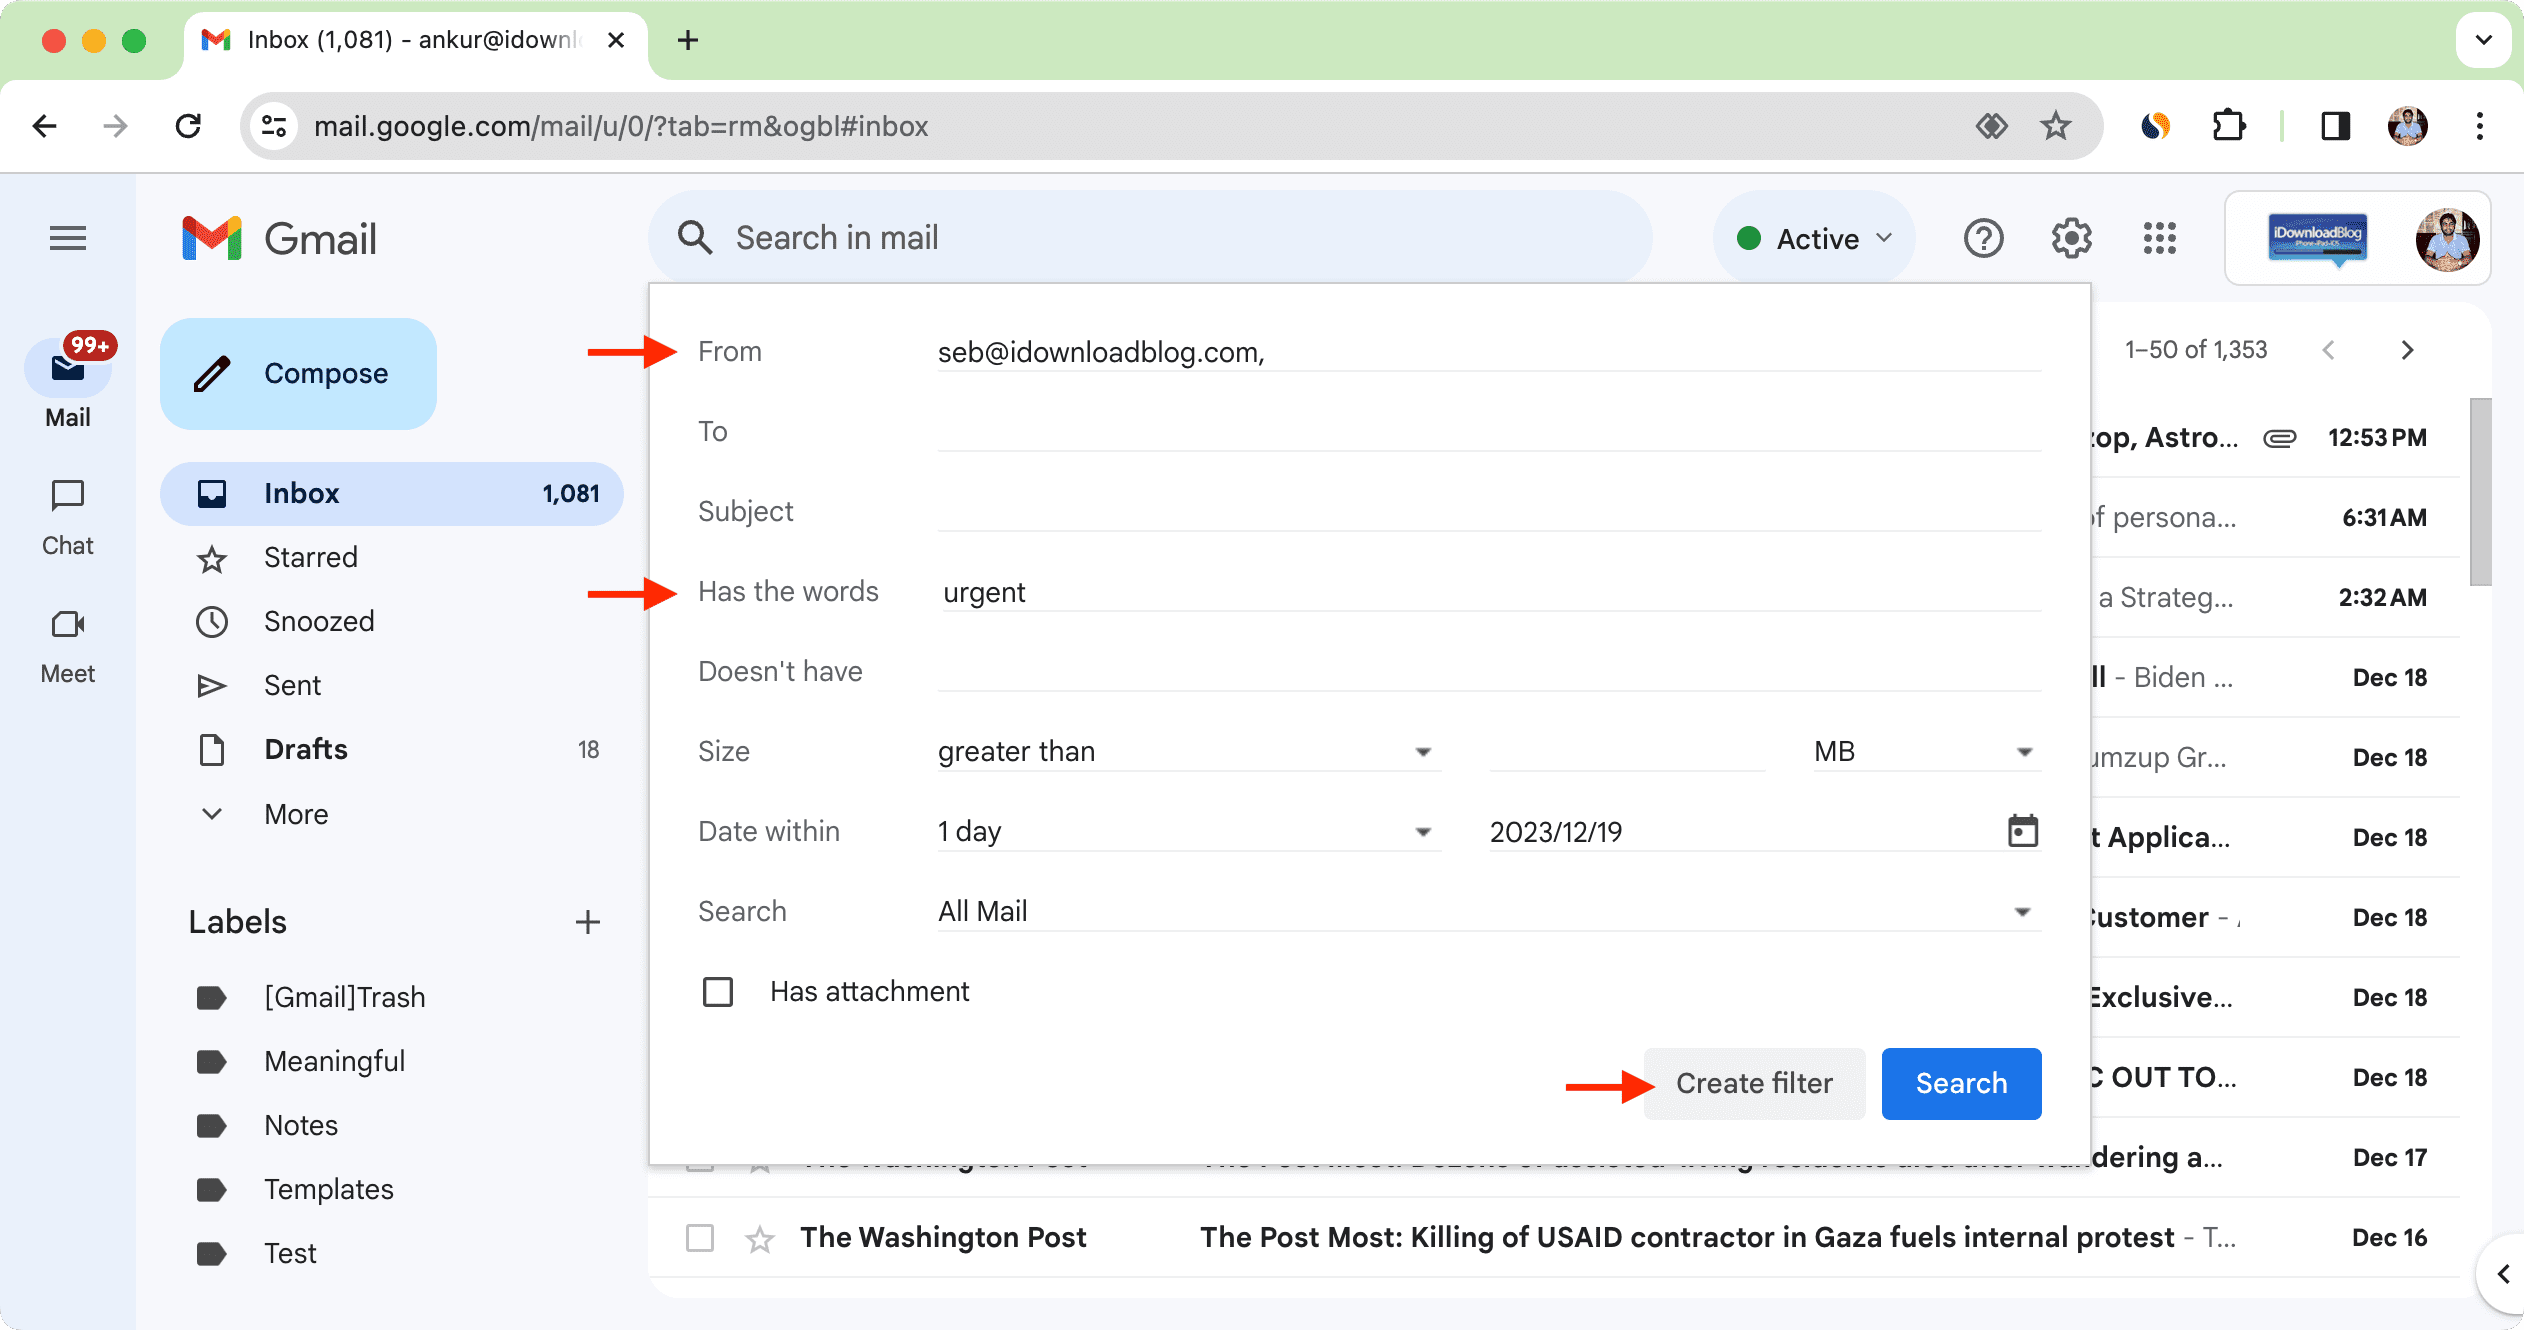 Search criteria to filter by in Gmail